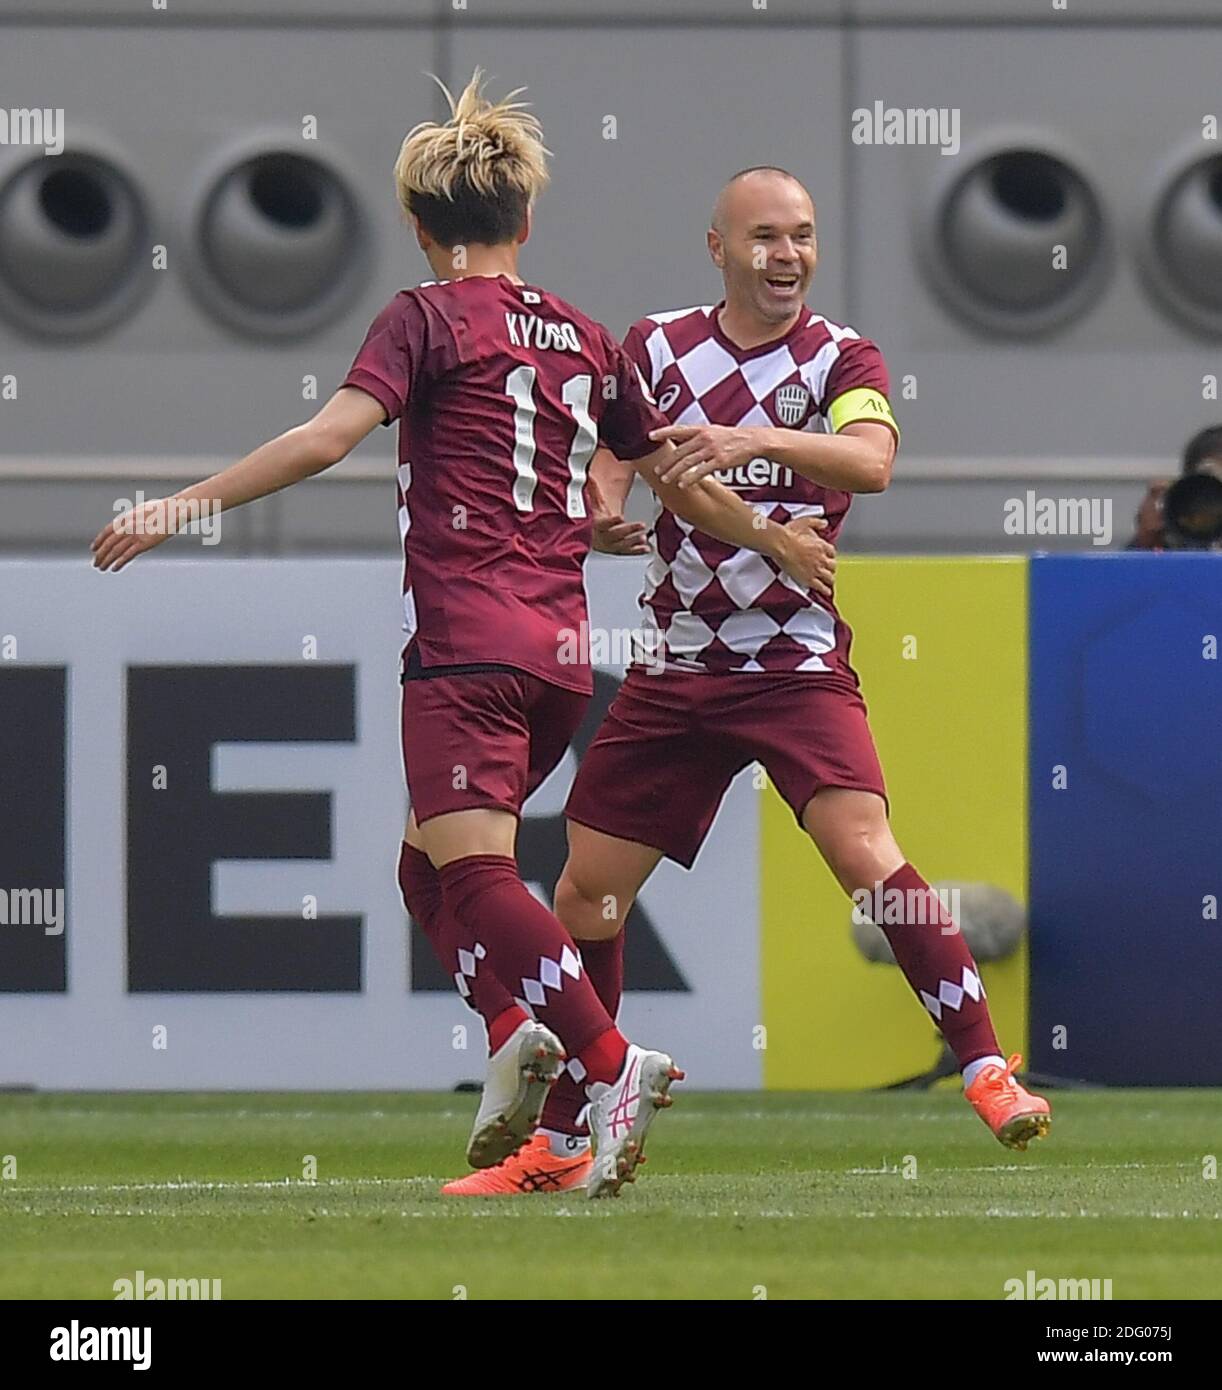 Doha, Qatar. 7th Dec, 2020. Andres Iniesta (R) of Vissel Kobe celebrates his goal during the round of 16 match of the AFC Champions League between Shanghai SIPG FC of China and Vissel Kobe of Japan in Doha, Qatar, Dec. 7, 2020. Credit: Nikku/Xinhua/Alamy Live News Stock Photo